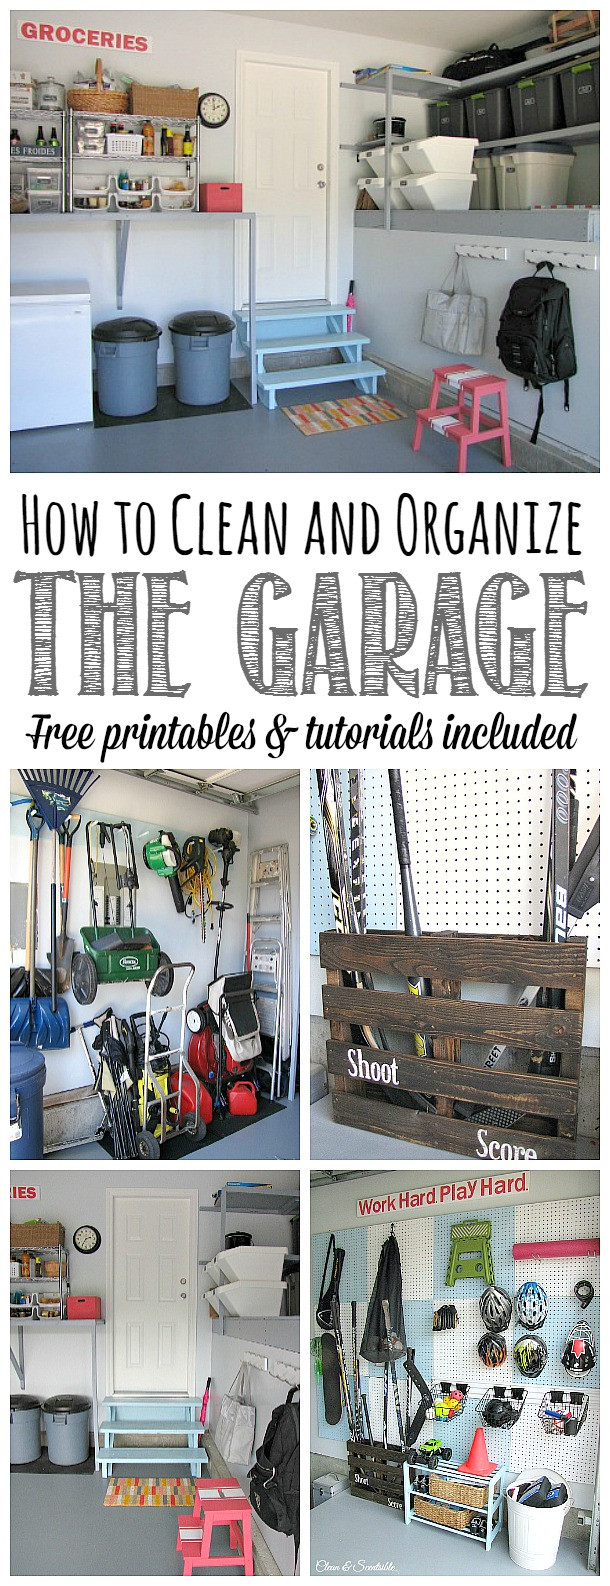 Garage Cleaning And Organizing
 How to Organize the Garage Clean and Scentsible